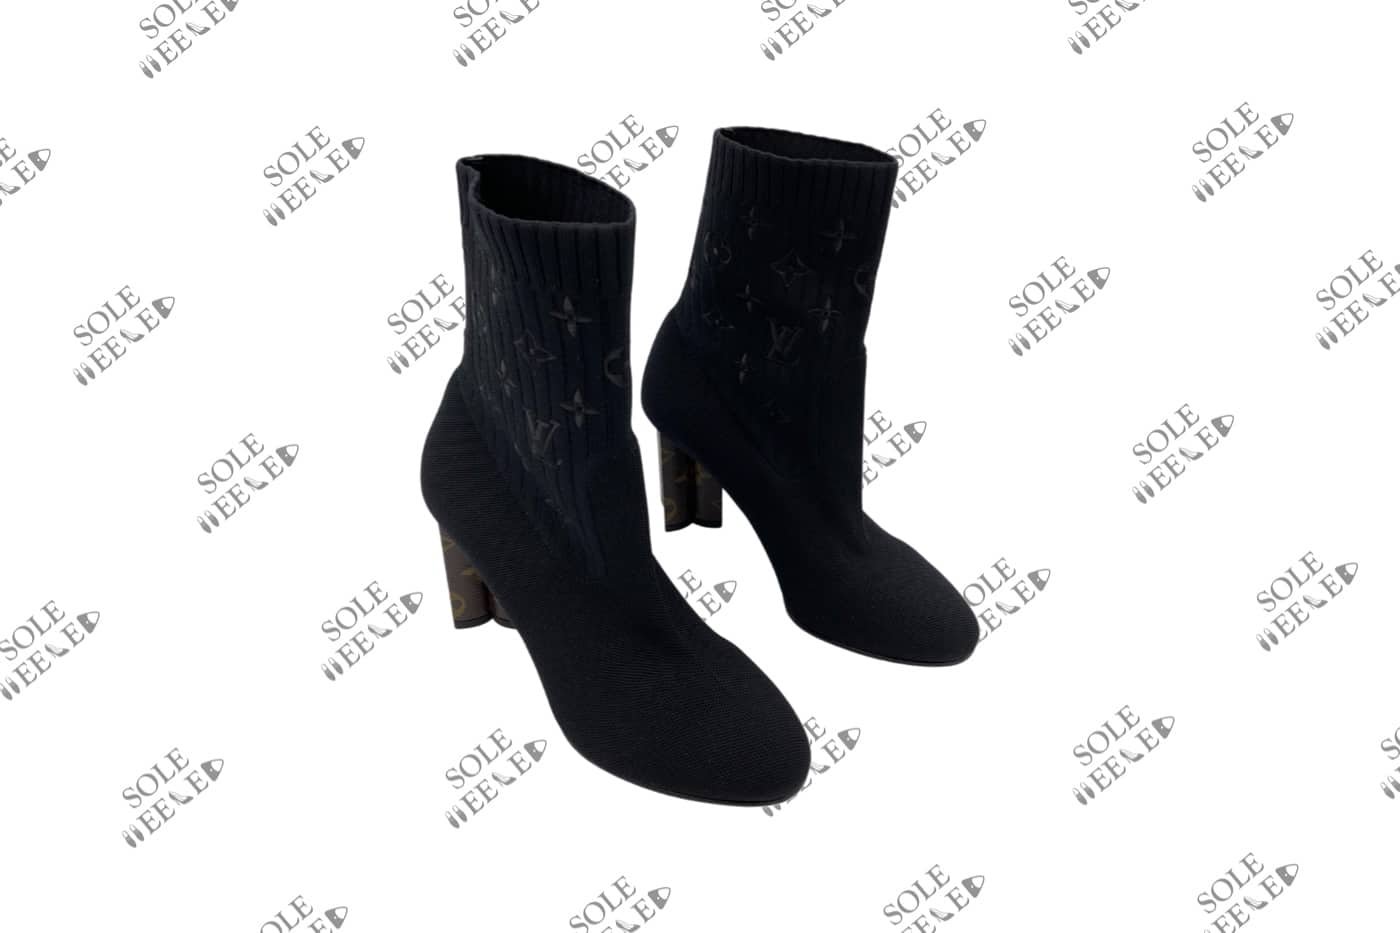 Used Louis Vuitton Silhouette MidCalf Sock Boots 10 SHOES  BOOTS   ANKLEMID CALF